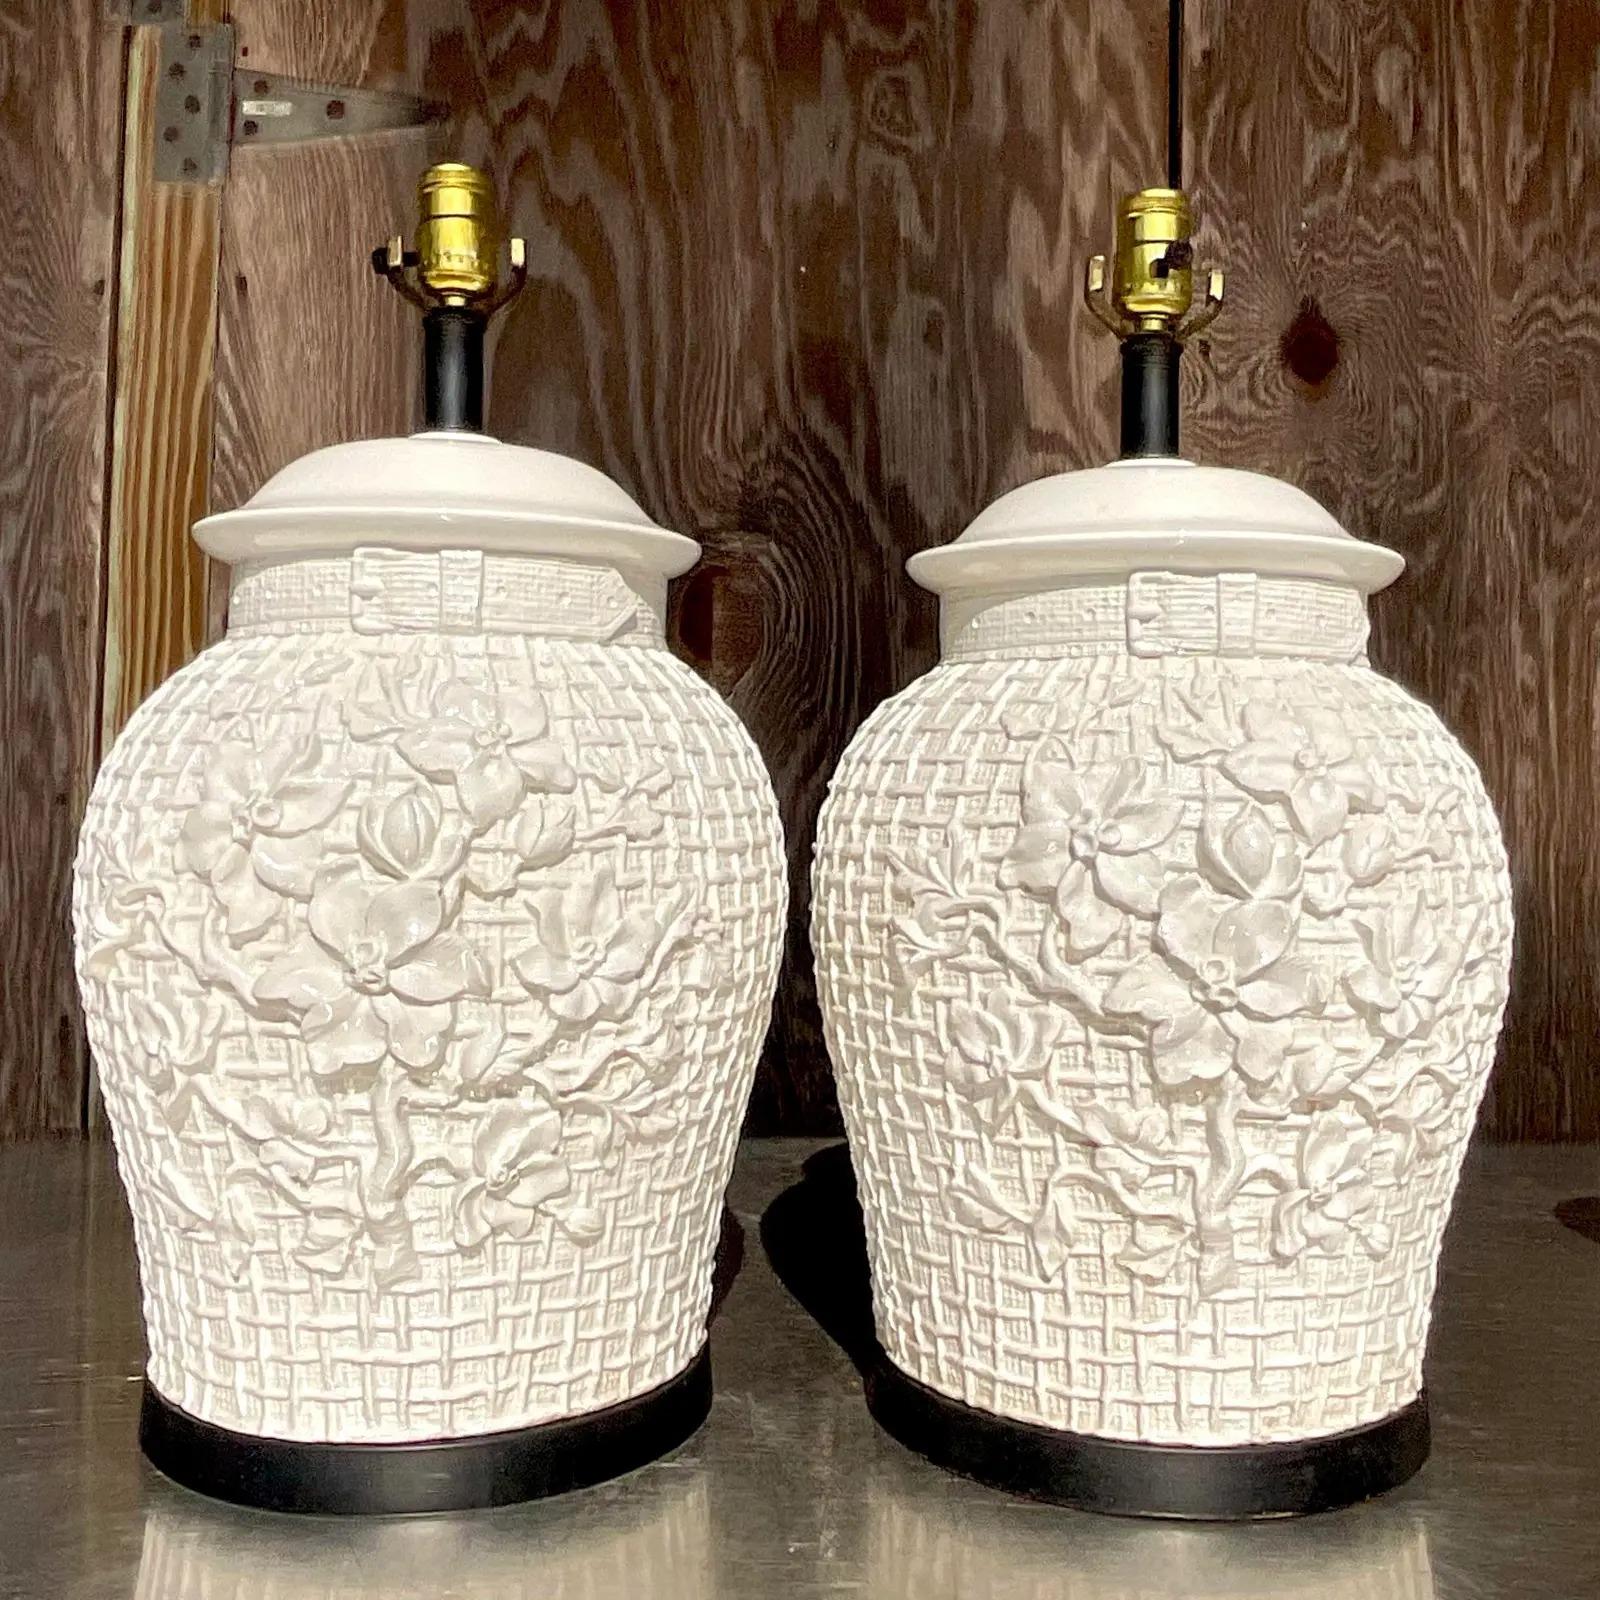 Vintage Regency Glazed Ceramic Floral Trellis Lamps - a Pair In Good Condition For Sale In west palm beach, FL